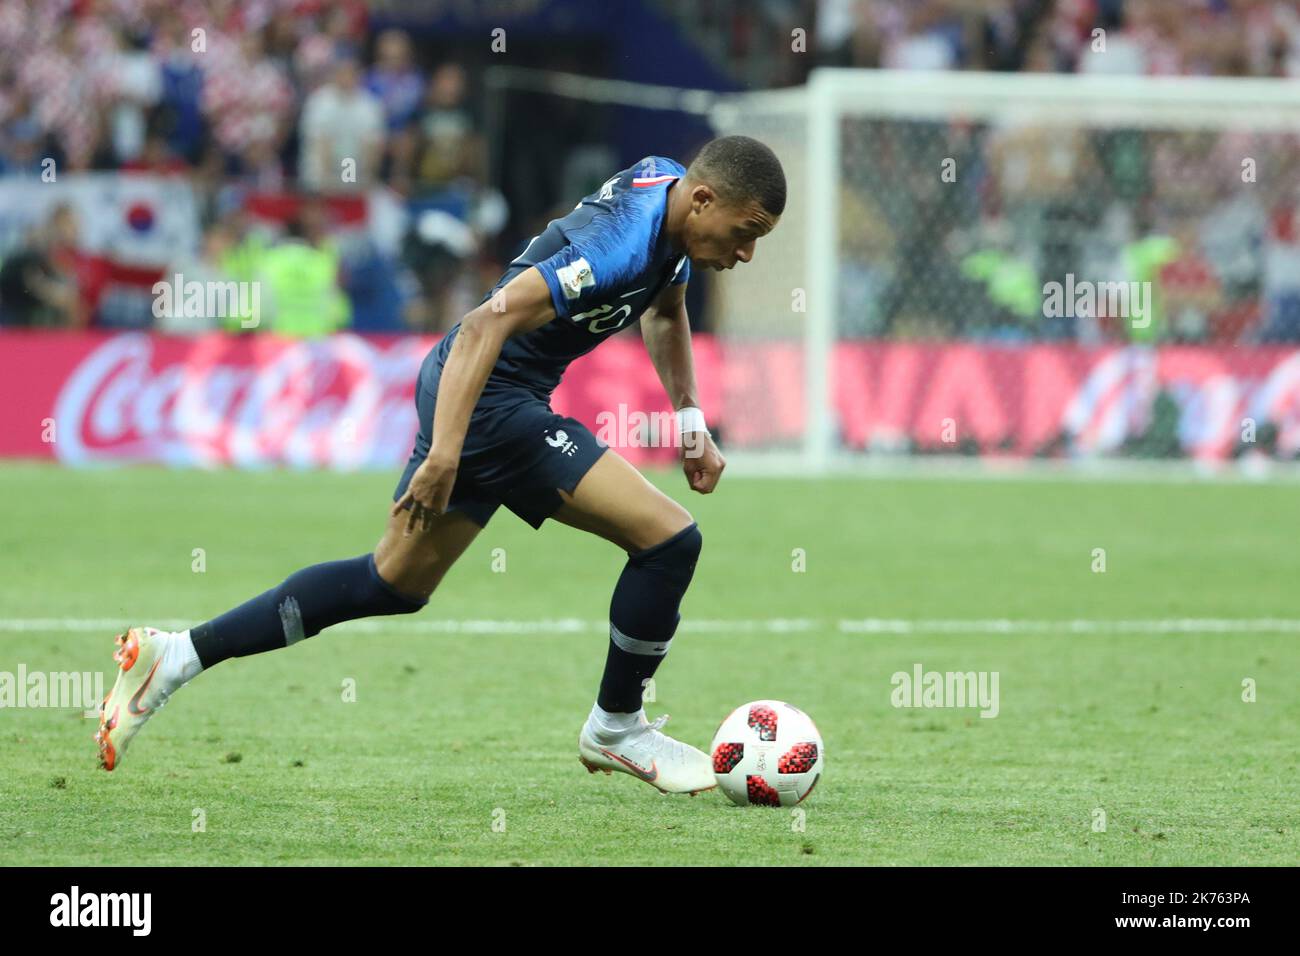 FIFA World Cup Russia 2018, Final Football Match France versus Croatia, France is the new World Champion. France won the World Cup for the second time 4???2 against Croatia. Pictured: Kylian Mbappe © Pierre Teyssot / Maxppp Stock Photo